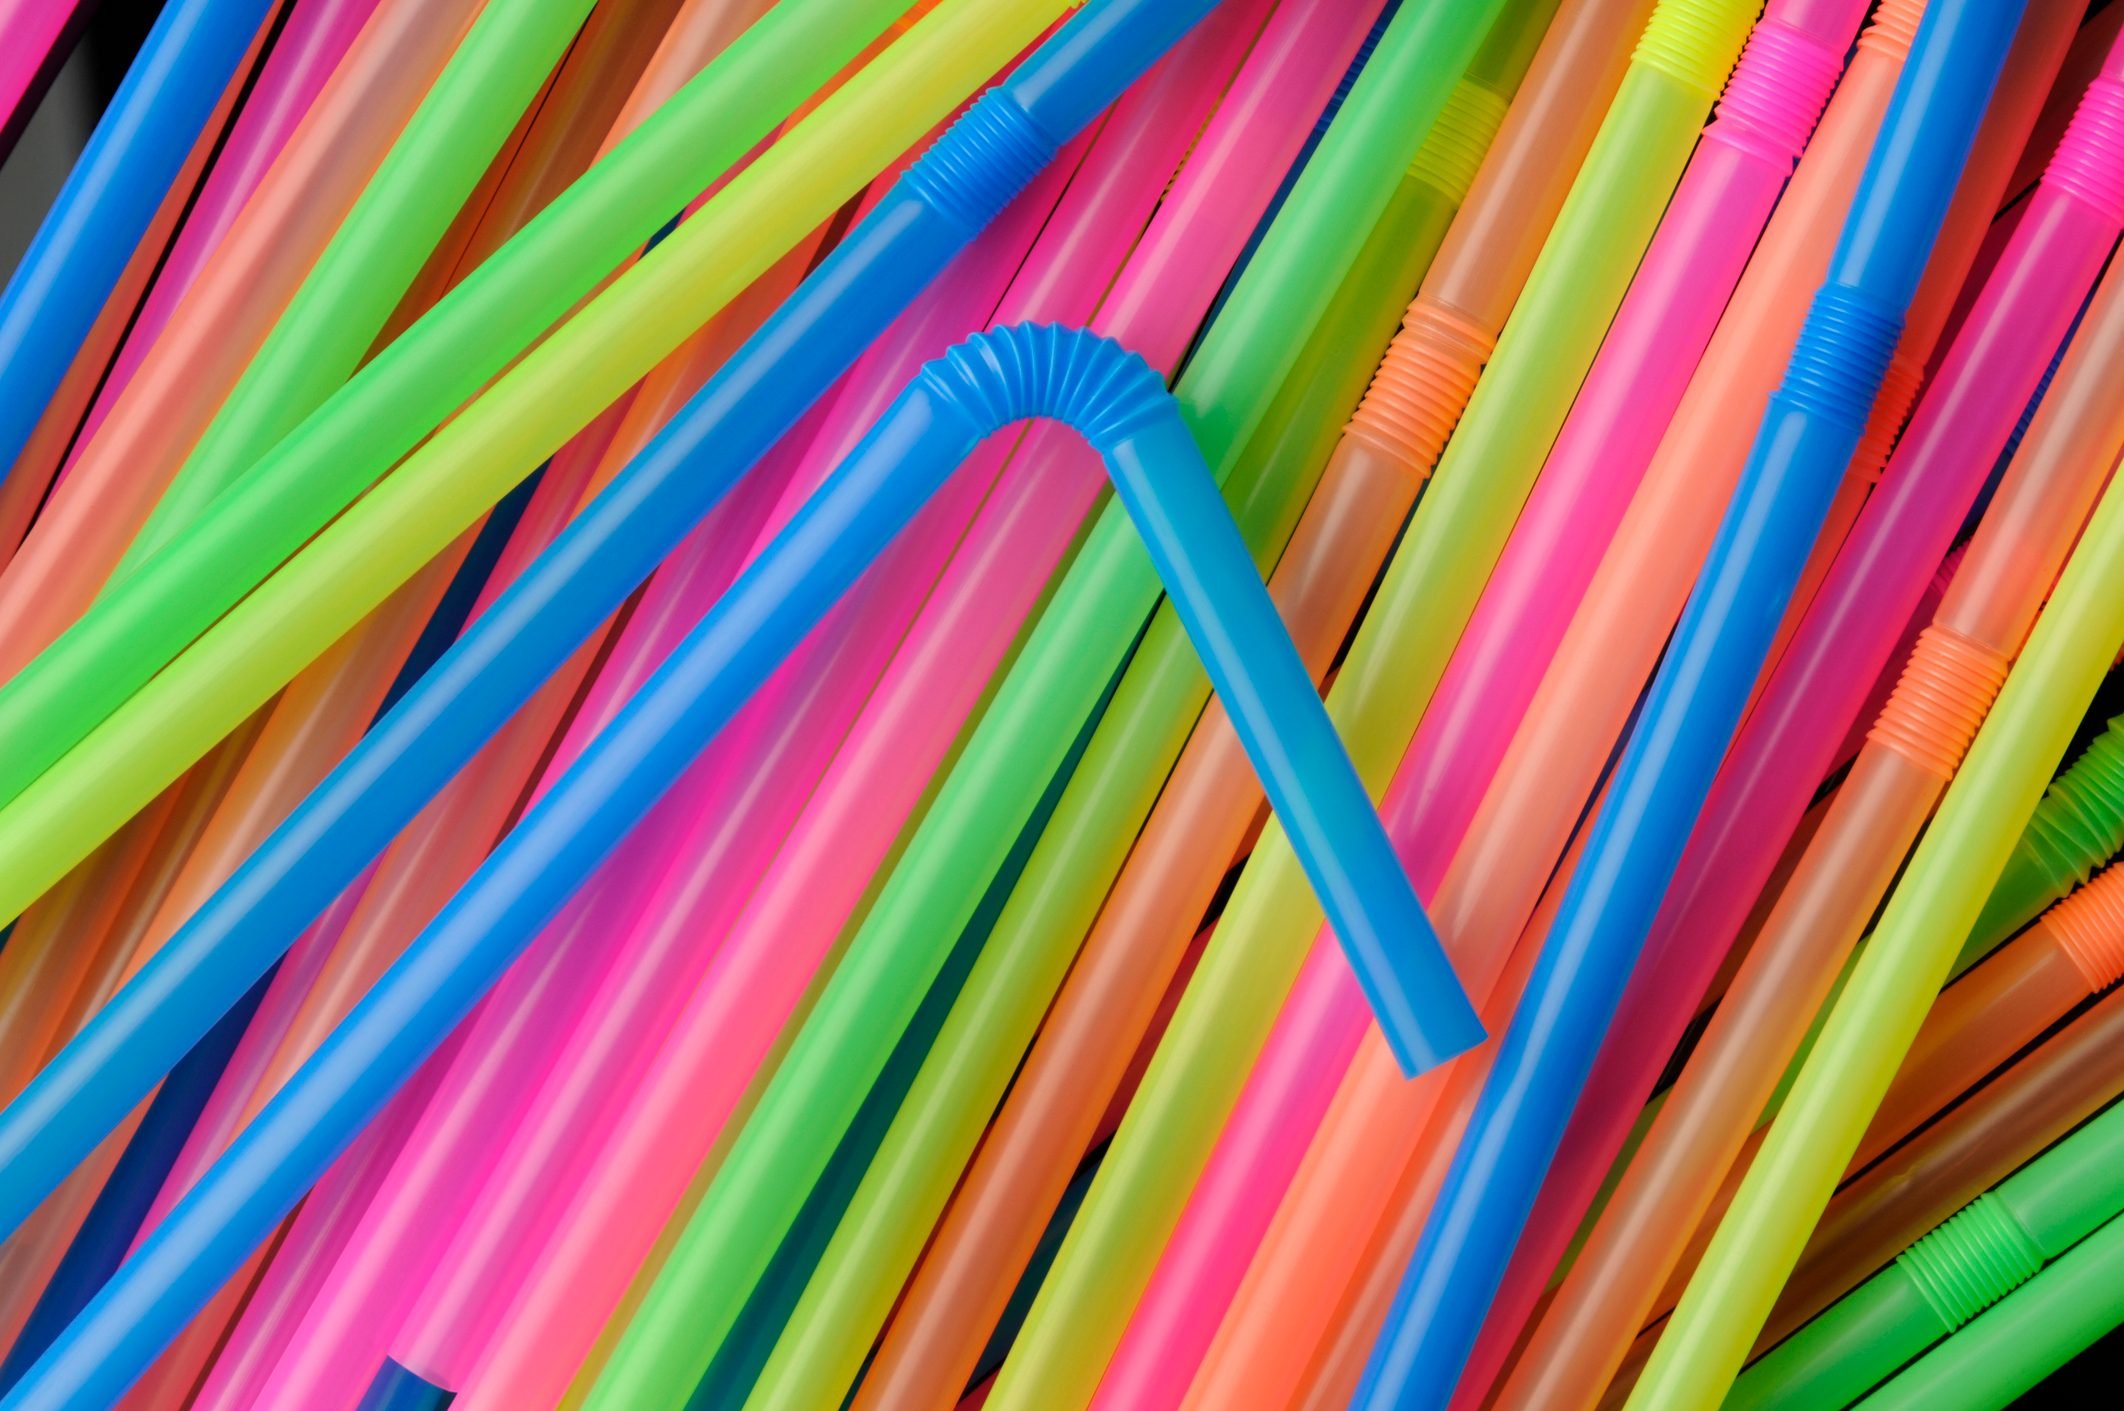 Do Straws Cause Wrinkles? Here's The Truth